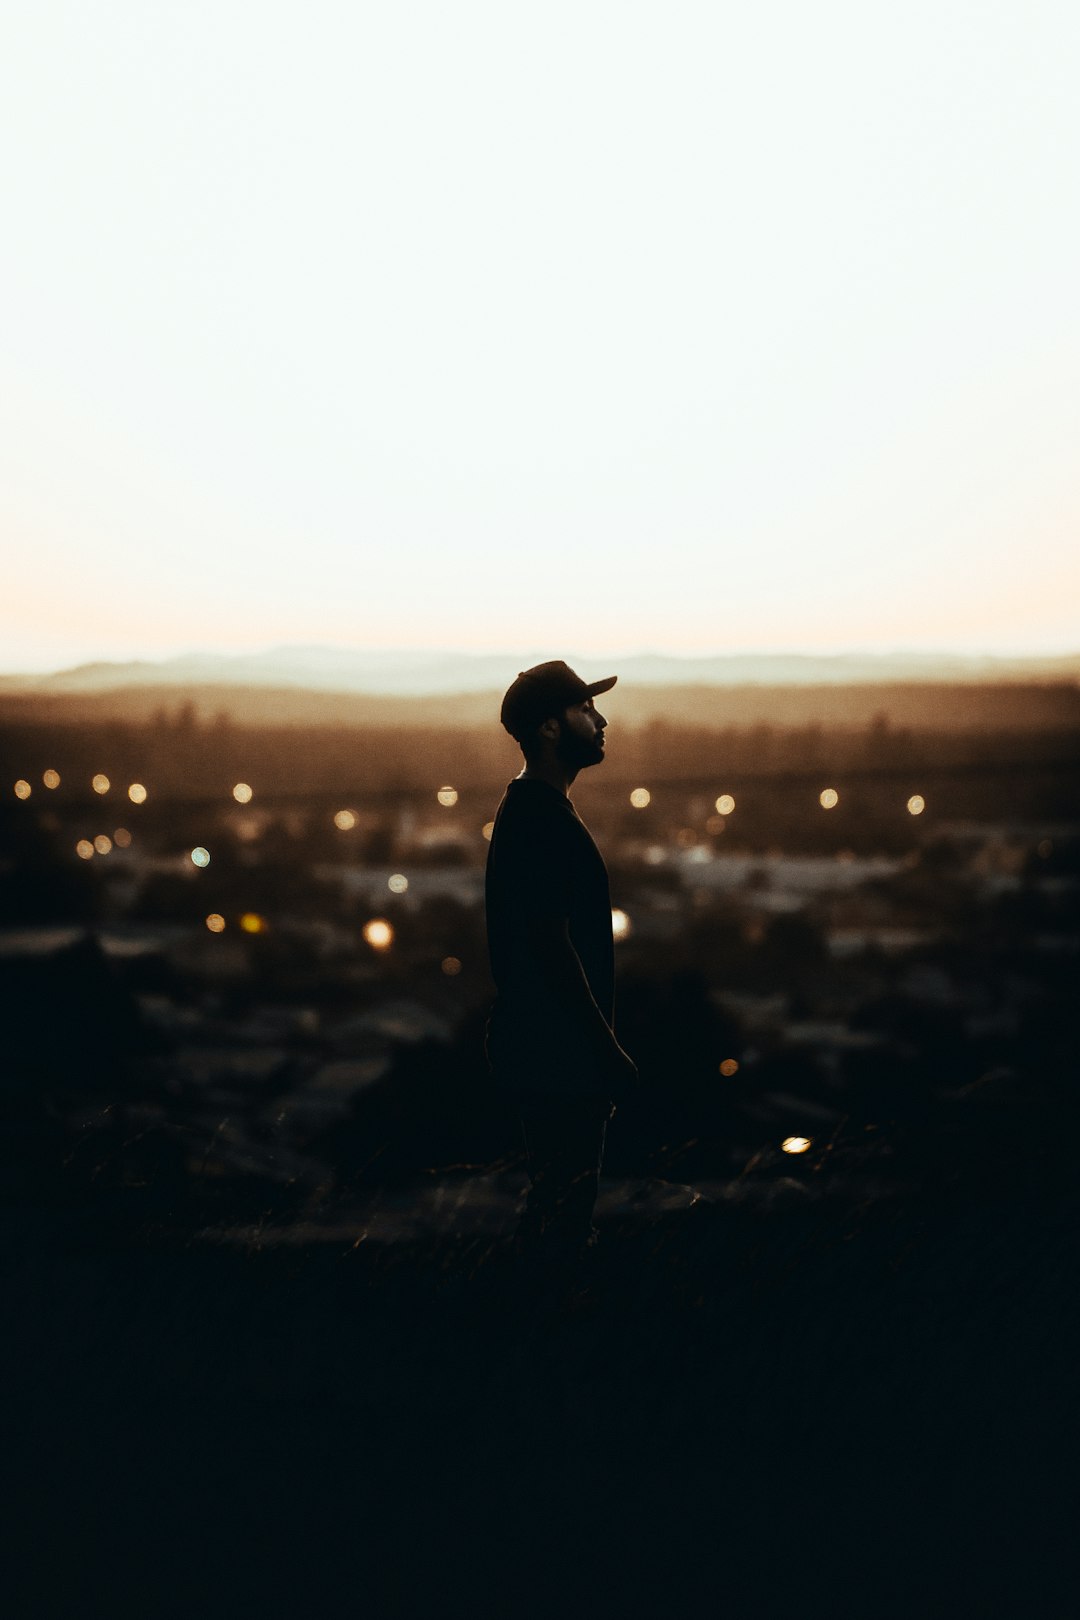 silhouette of man wearing hat standing on ground during sunset